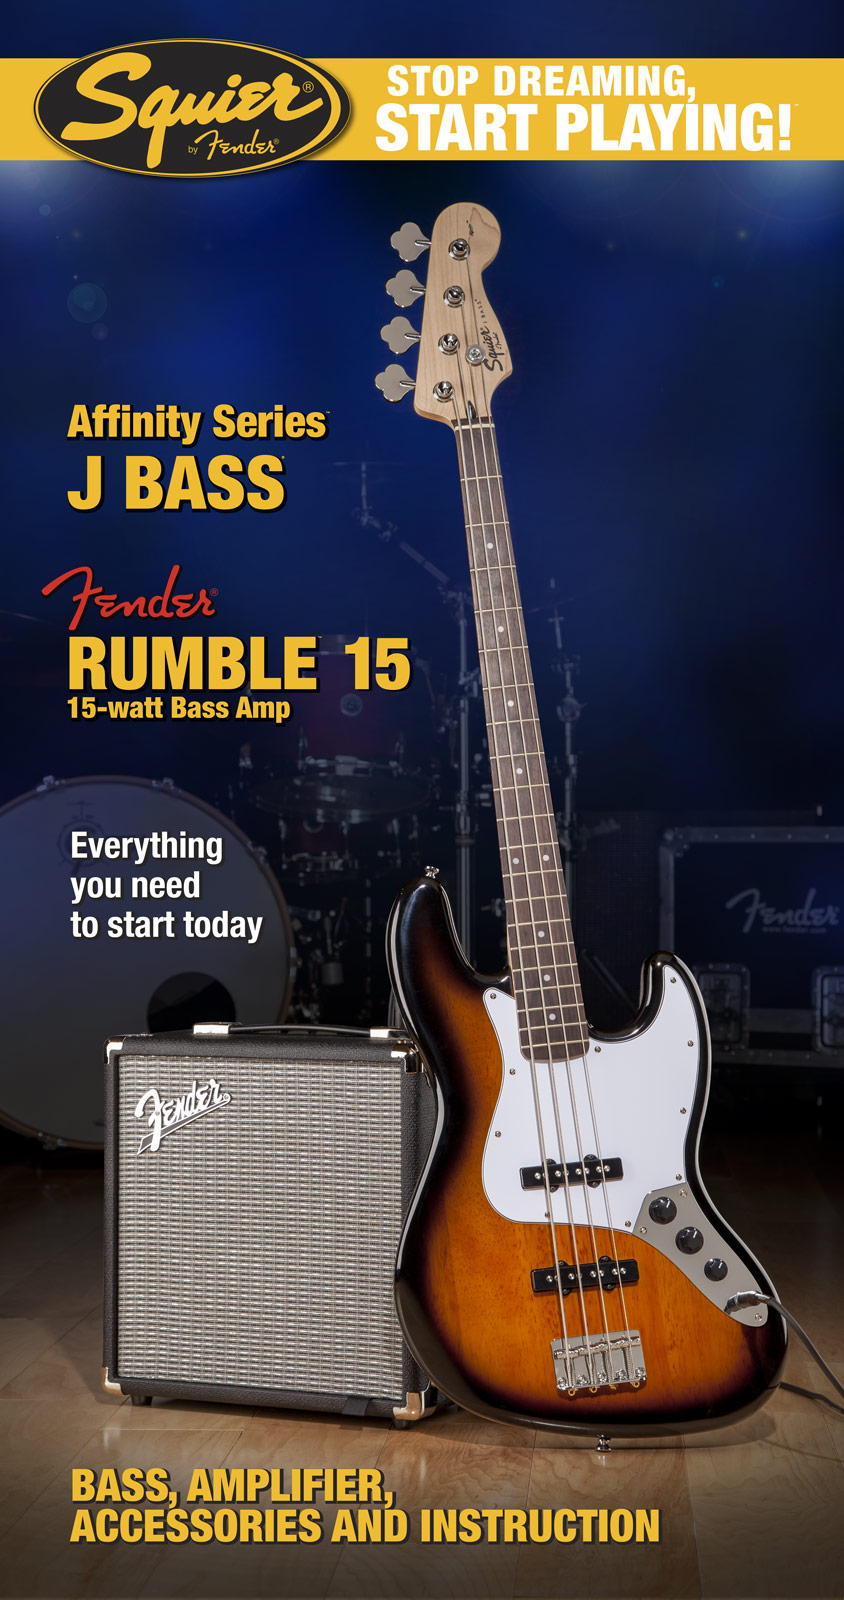 Squier Jazz Bass Affinity With Fender Rumble 15 Set - E-Bass Set - Variation 1